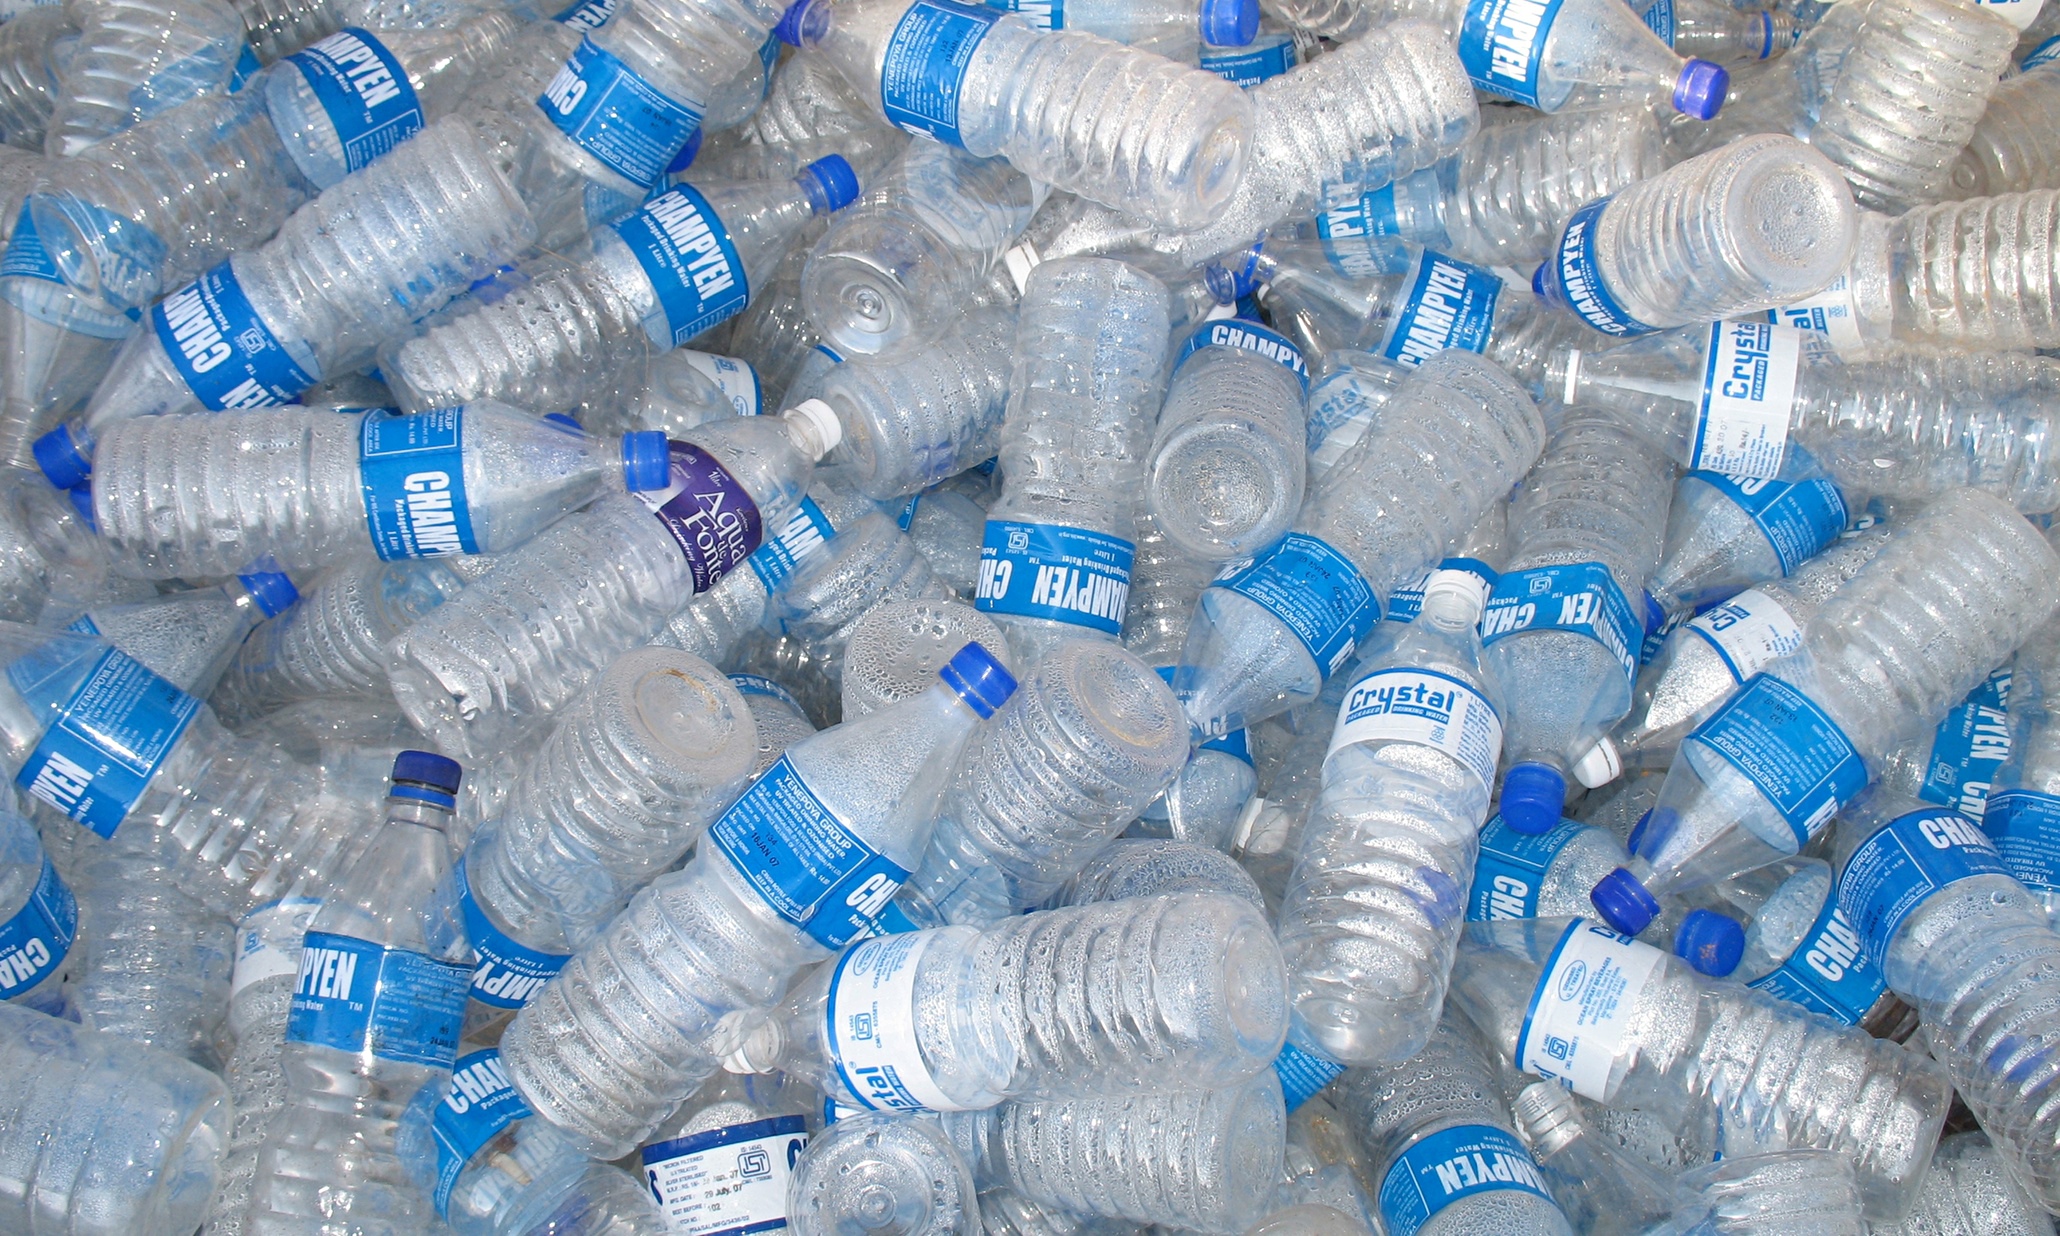 🏠 Declutter Your Home and We’ll Reveal What You Should Get Rid of from Your Life Empty plastic drinking water bottles